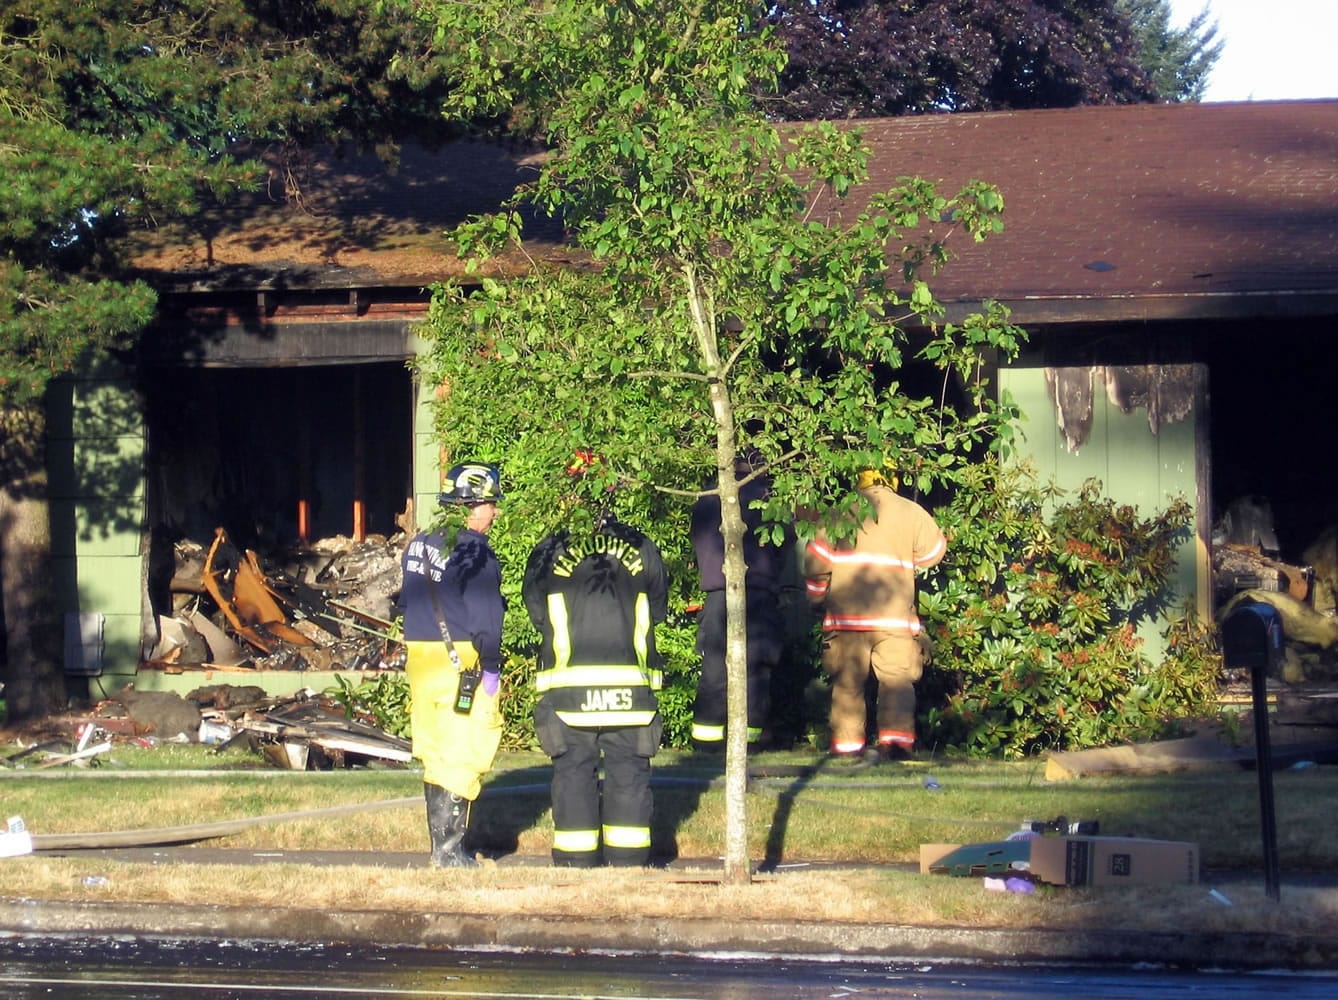 Vancouver firefighters work an early morning fire on Lieser Road.